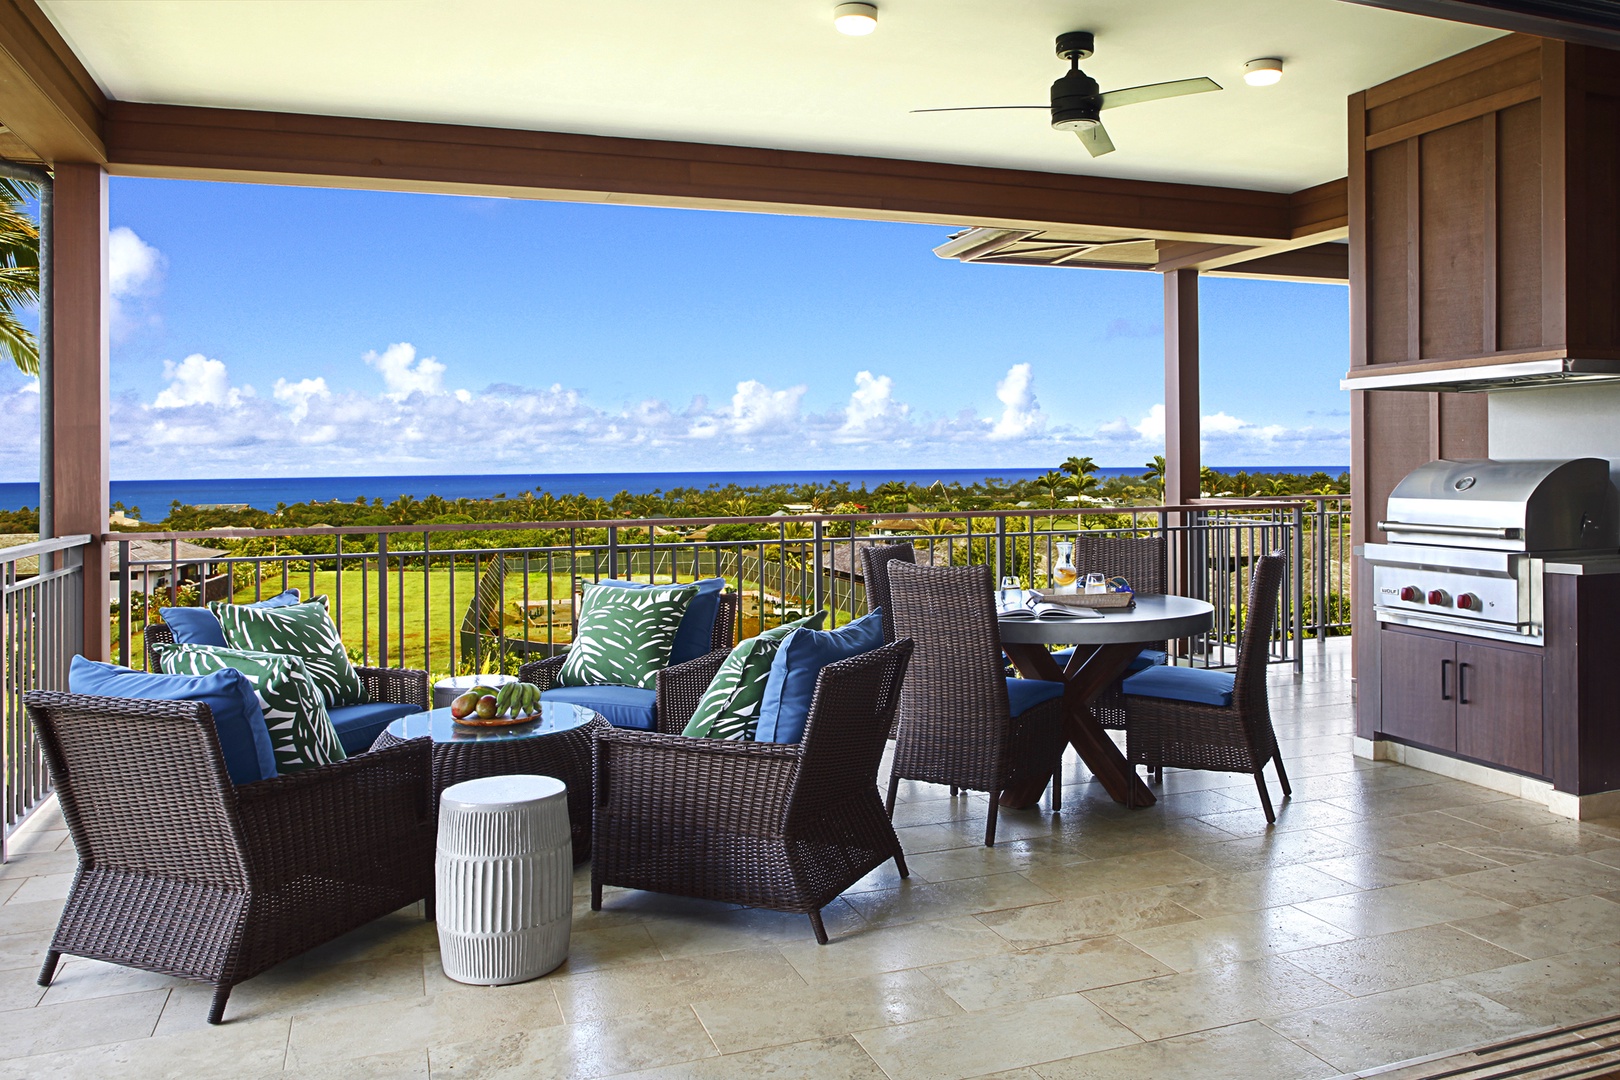 Koloa Vacation Rentals, Kukui'ula Villa #8 - Lanai seating with outdoor dining and gas BBQ to entertain friends or simply relax